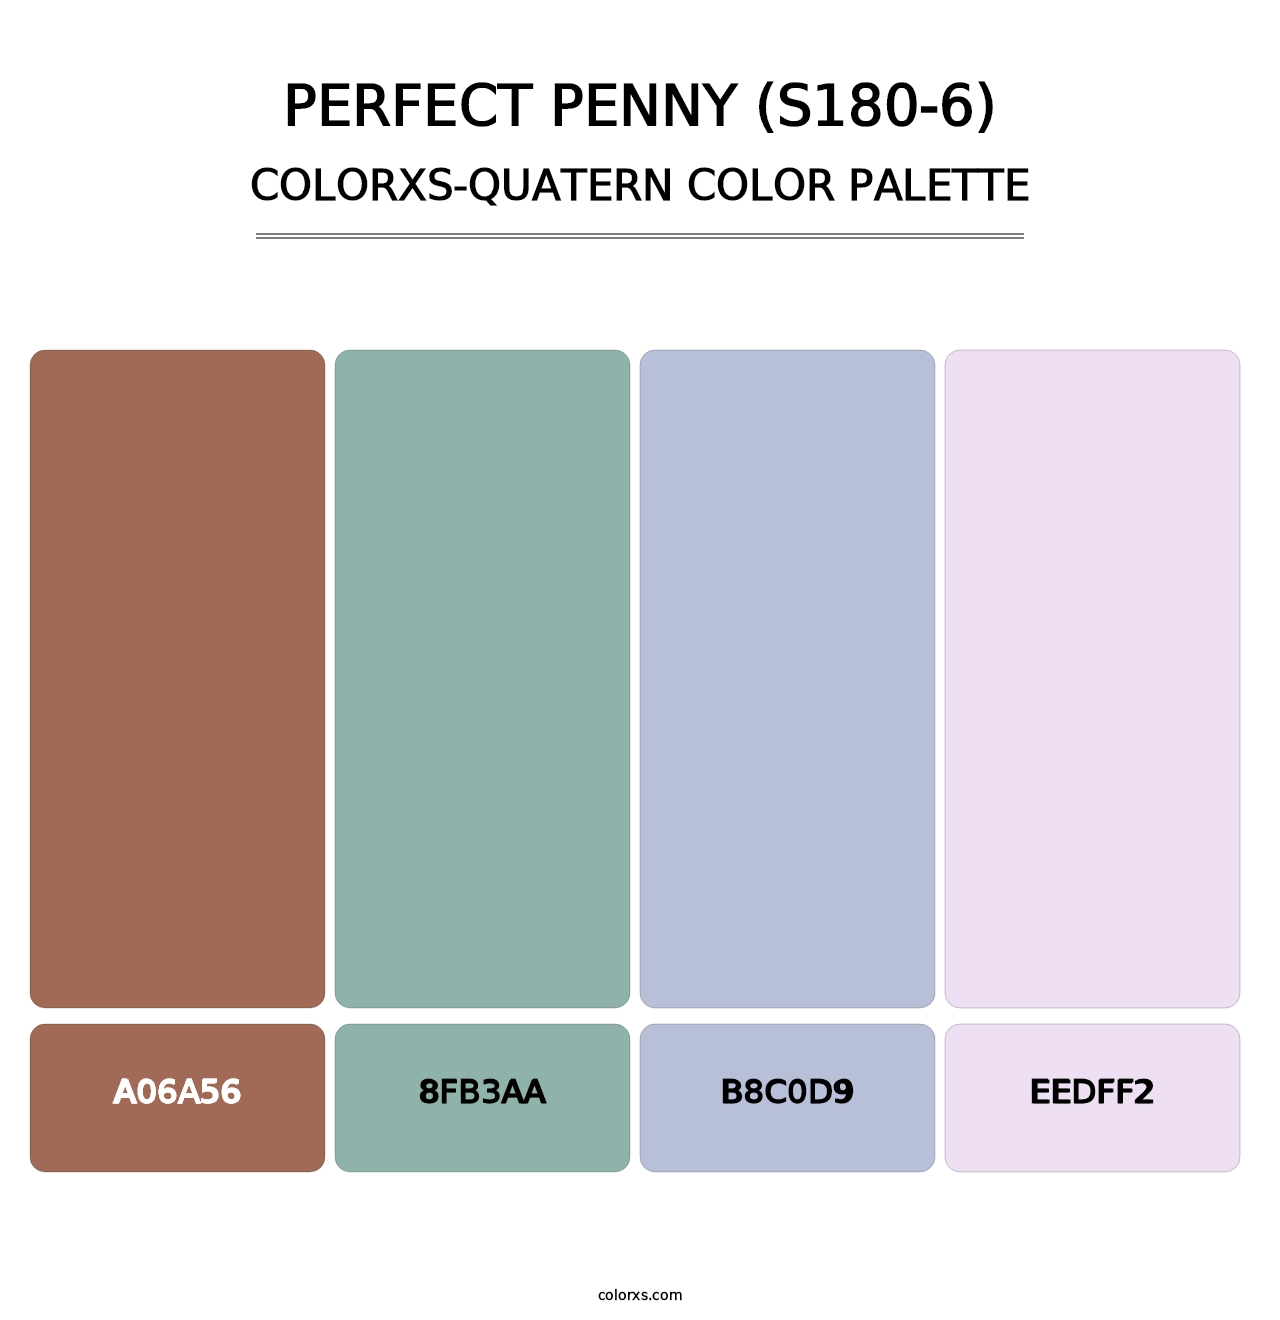 Perfect Penny (S180-6) - Colorxs Quatern Palette